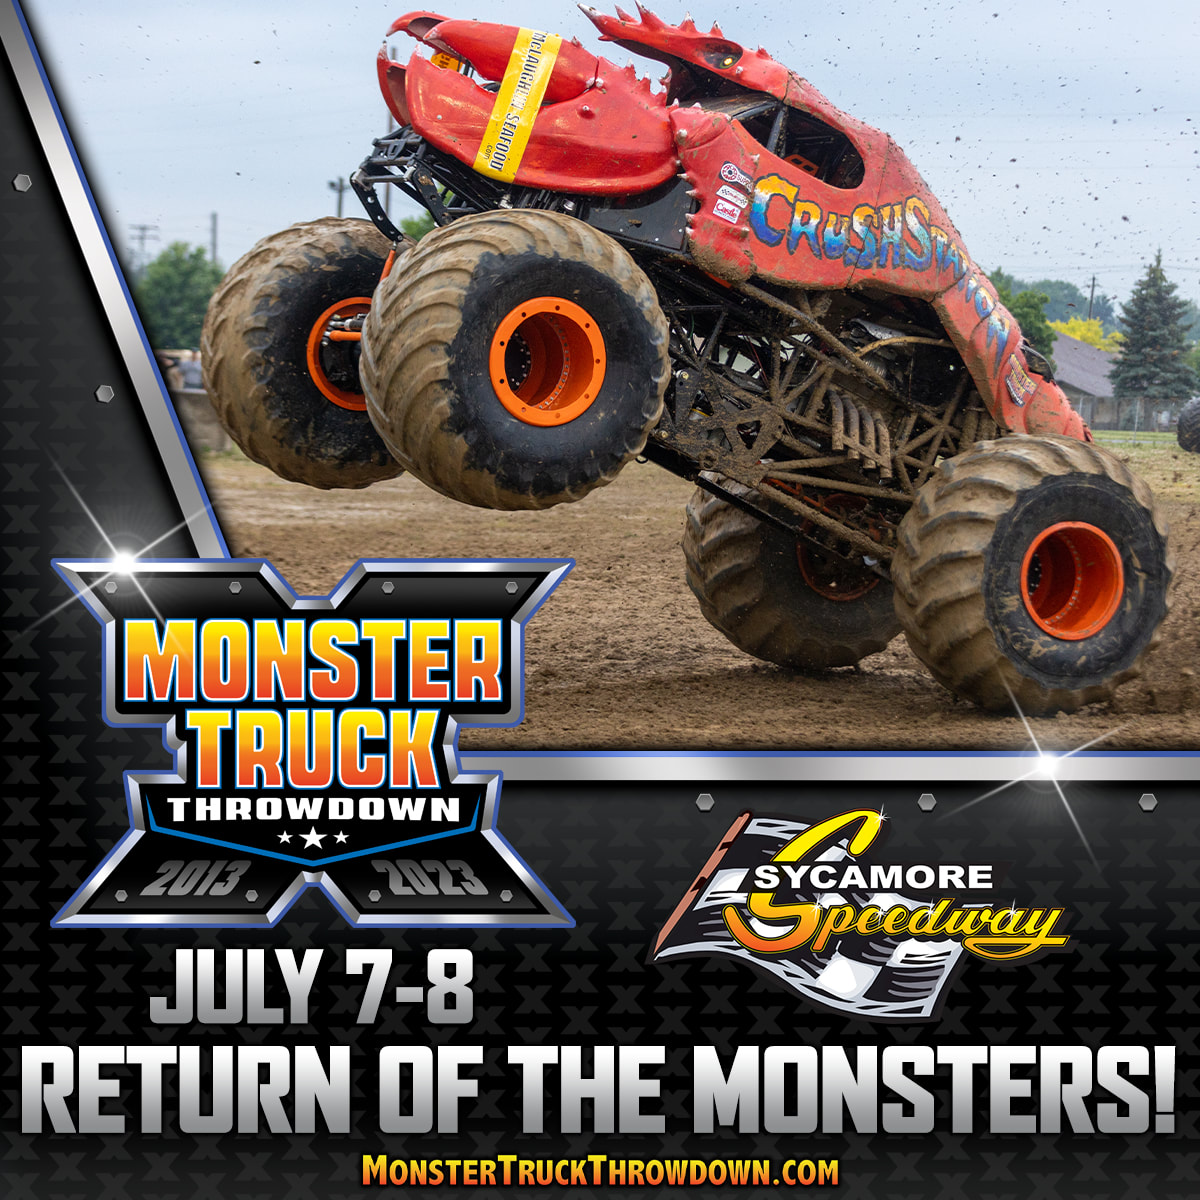 Monster Truck Throwdown Sycamore Speedway Midwest's Best Clay Track!